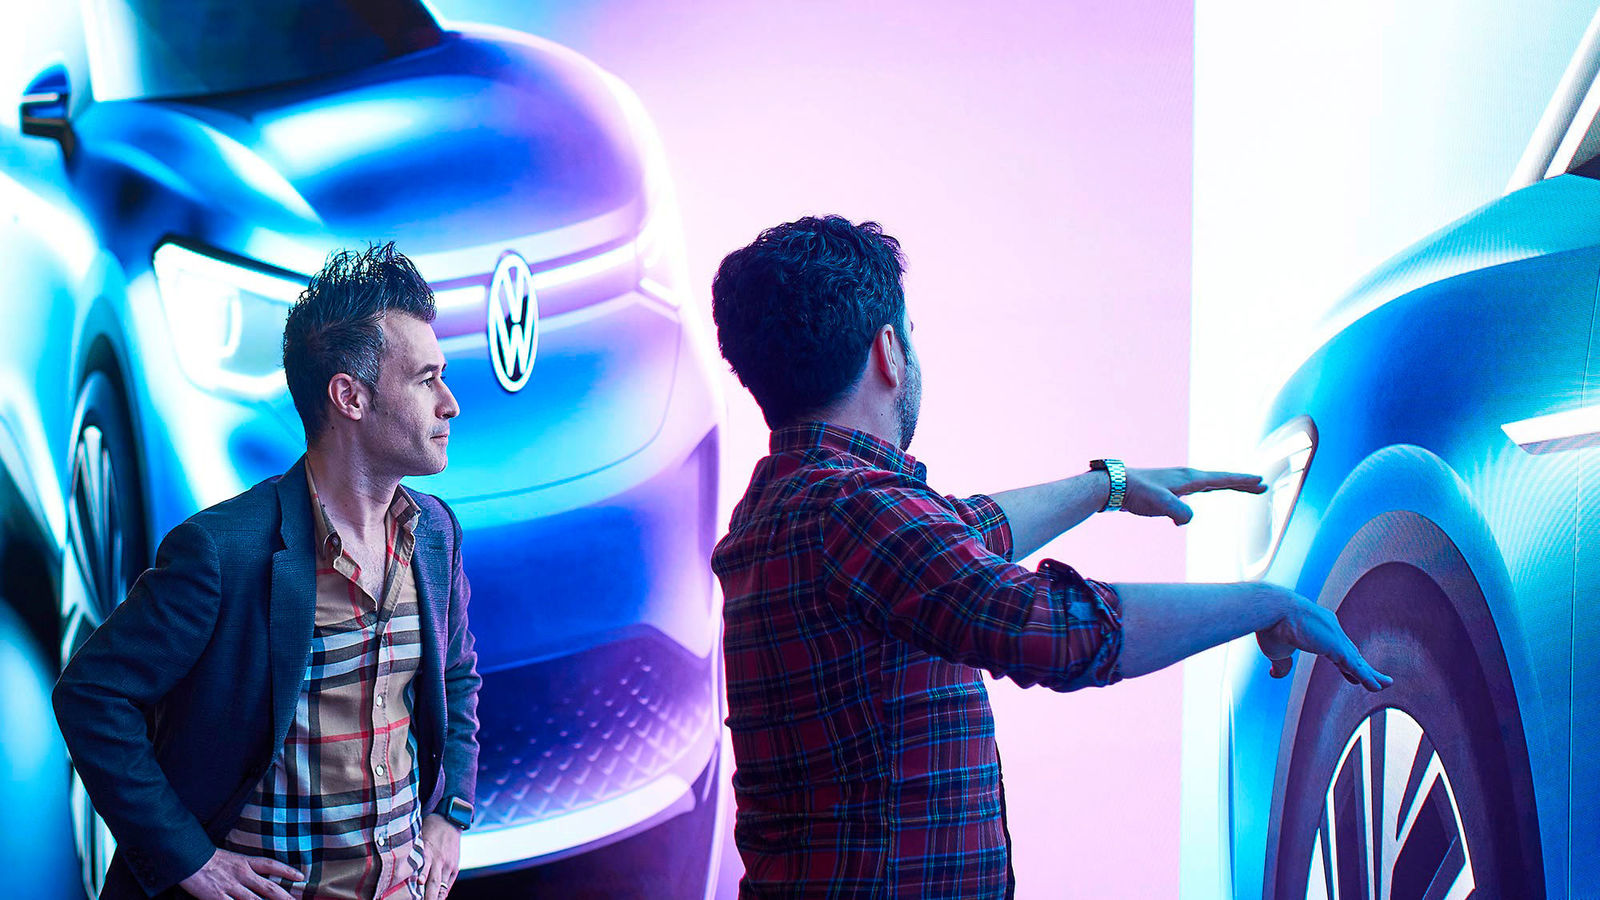 Story: "Volkswagen designers are creating even more digitally"